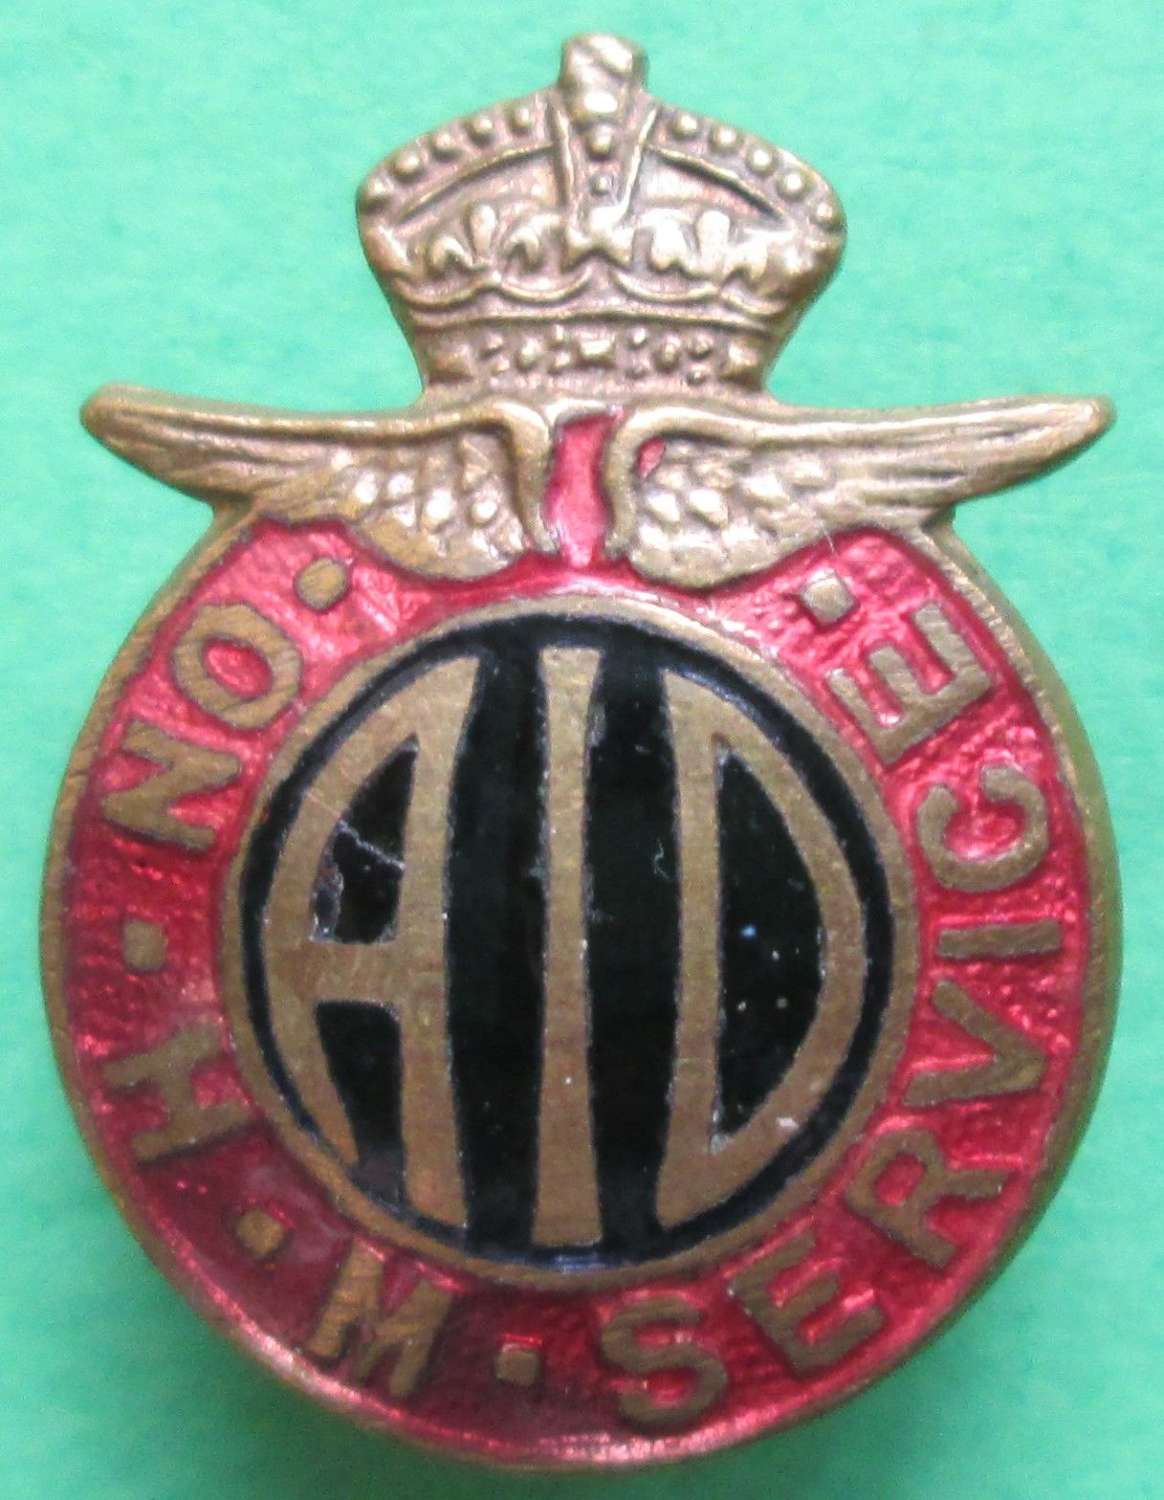 A SMALL PIN BADGE FOR THE AIR INSPECTOR DEPARTMENT